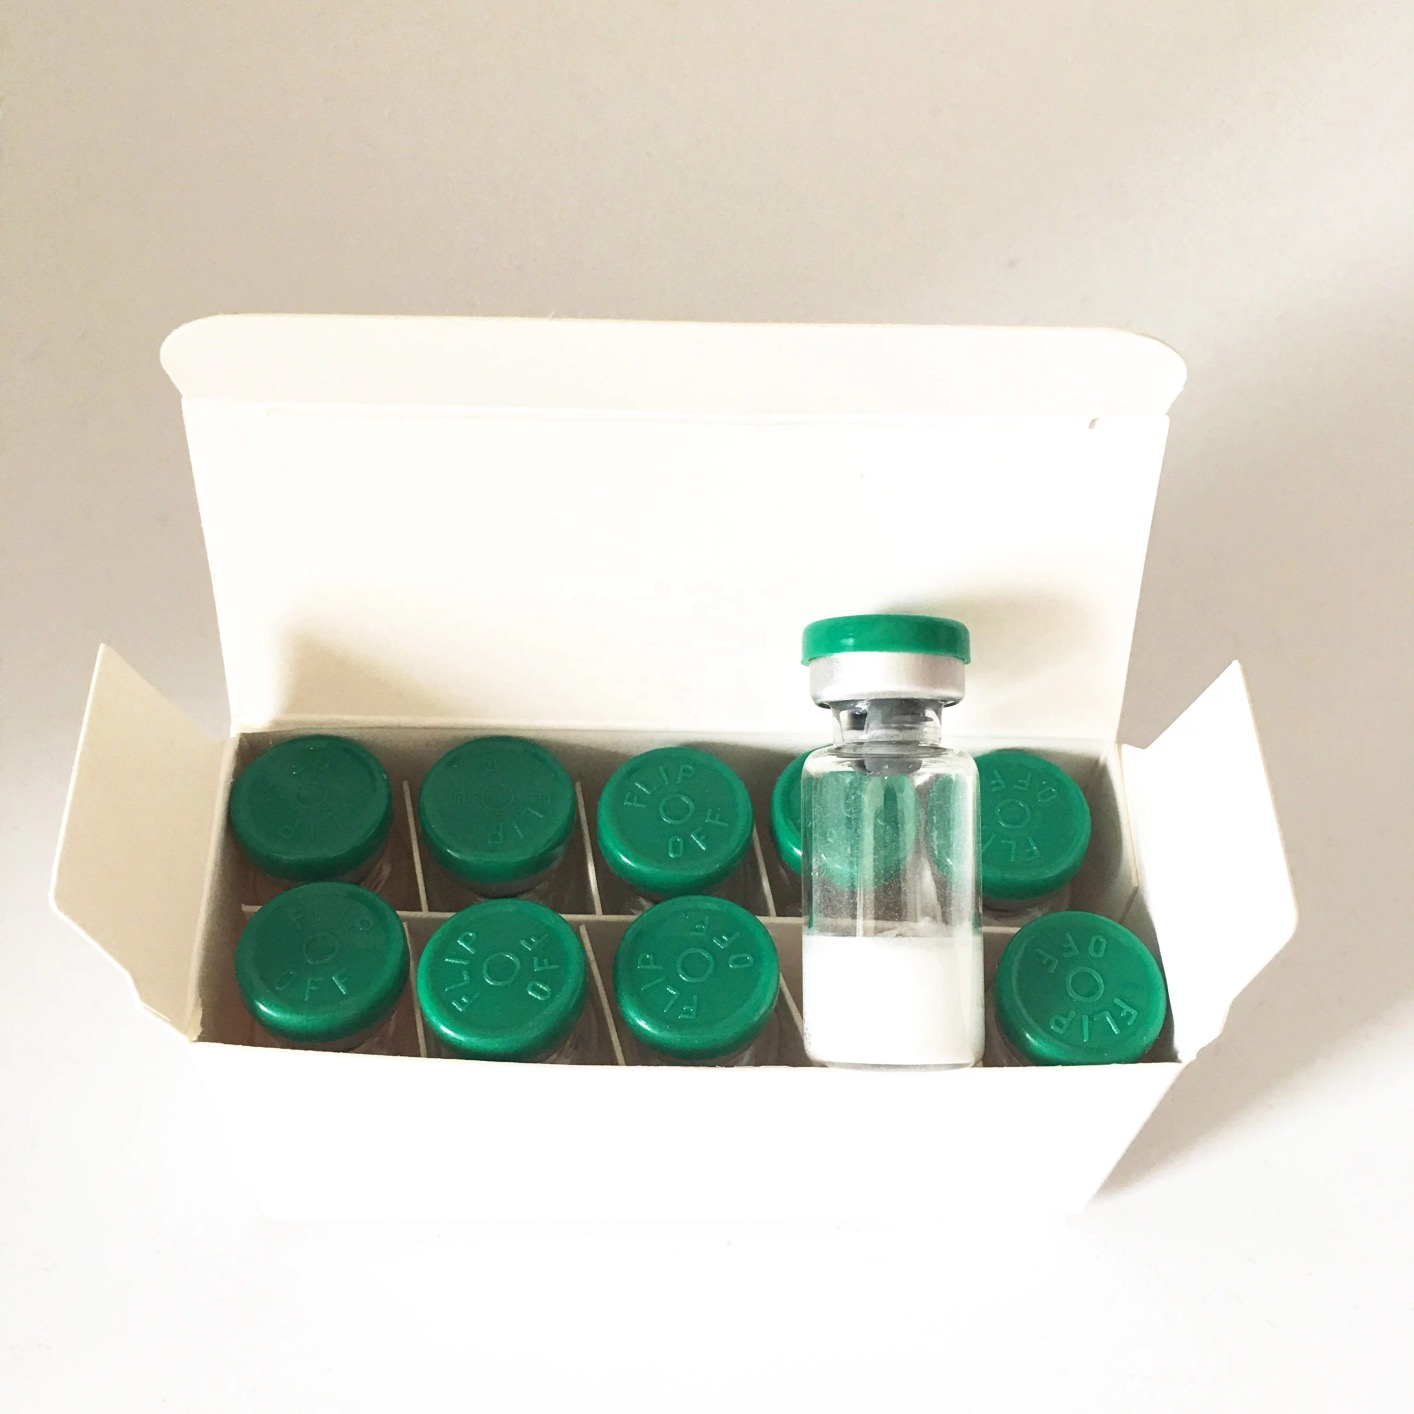 Hot selling high purity peptide Gonadorelin 2mg with best price